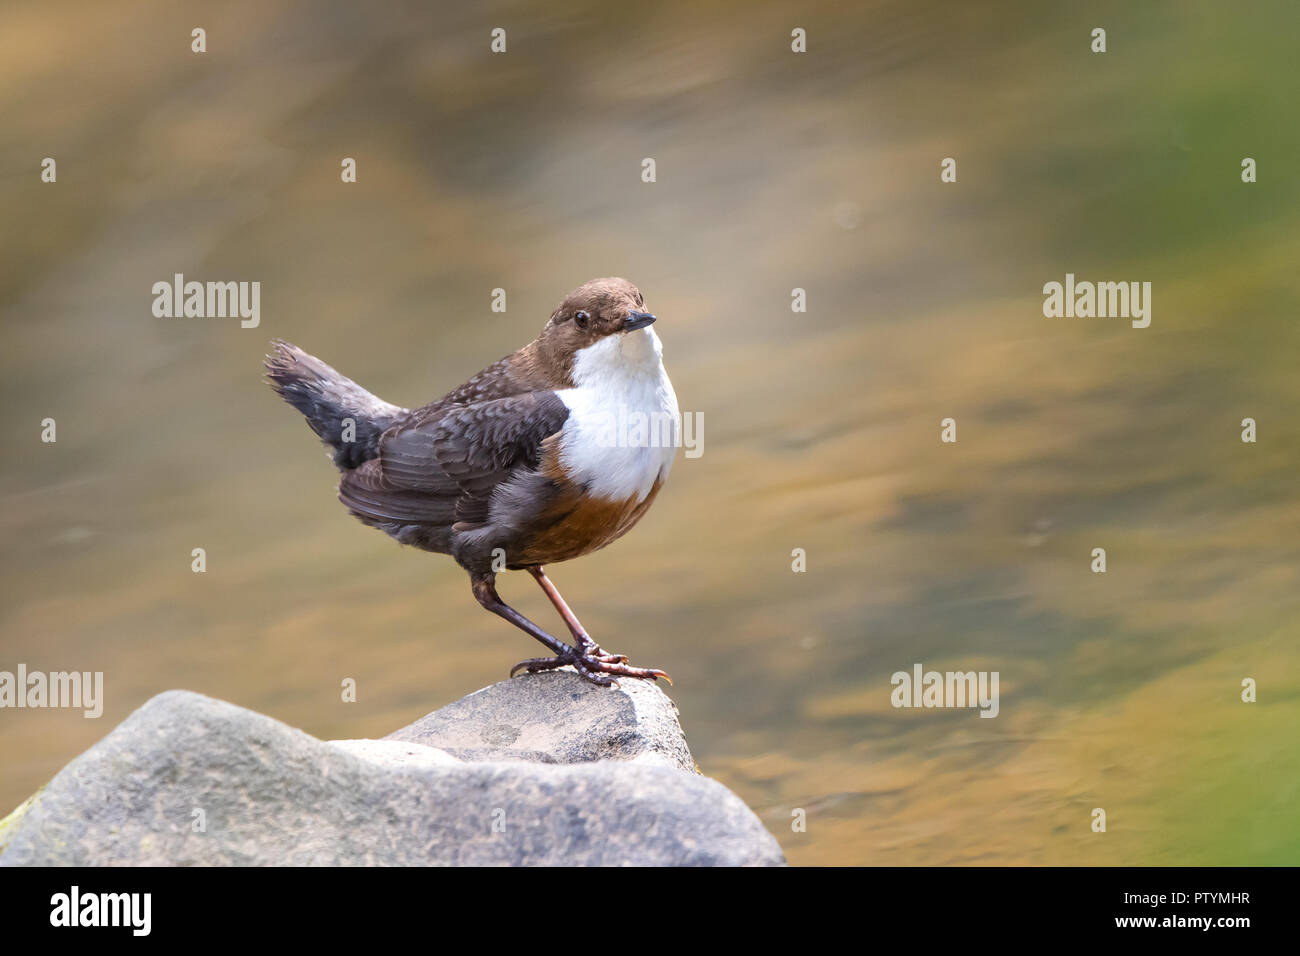 Front view close up of wild UK dipper bird (Cinclus cinclus) isolated on a rock at water's edge. Motion blur of moving water in flowing stream. Stock Photo